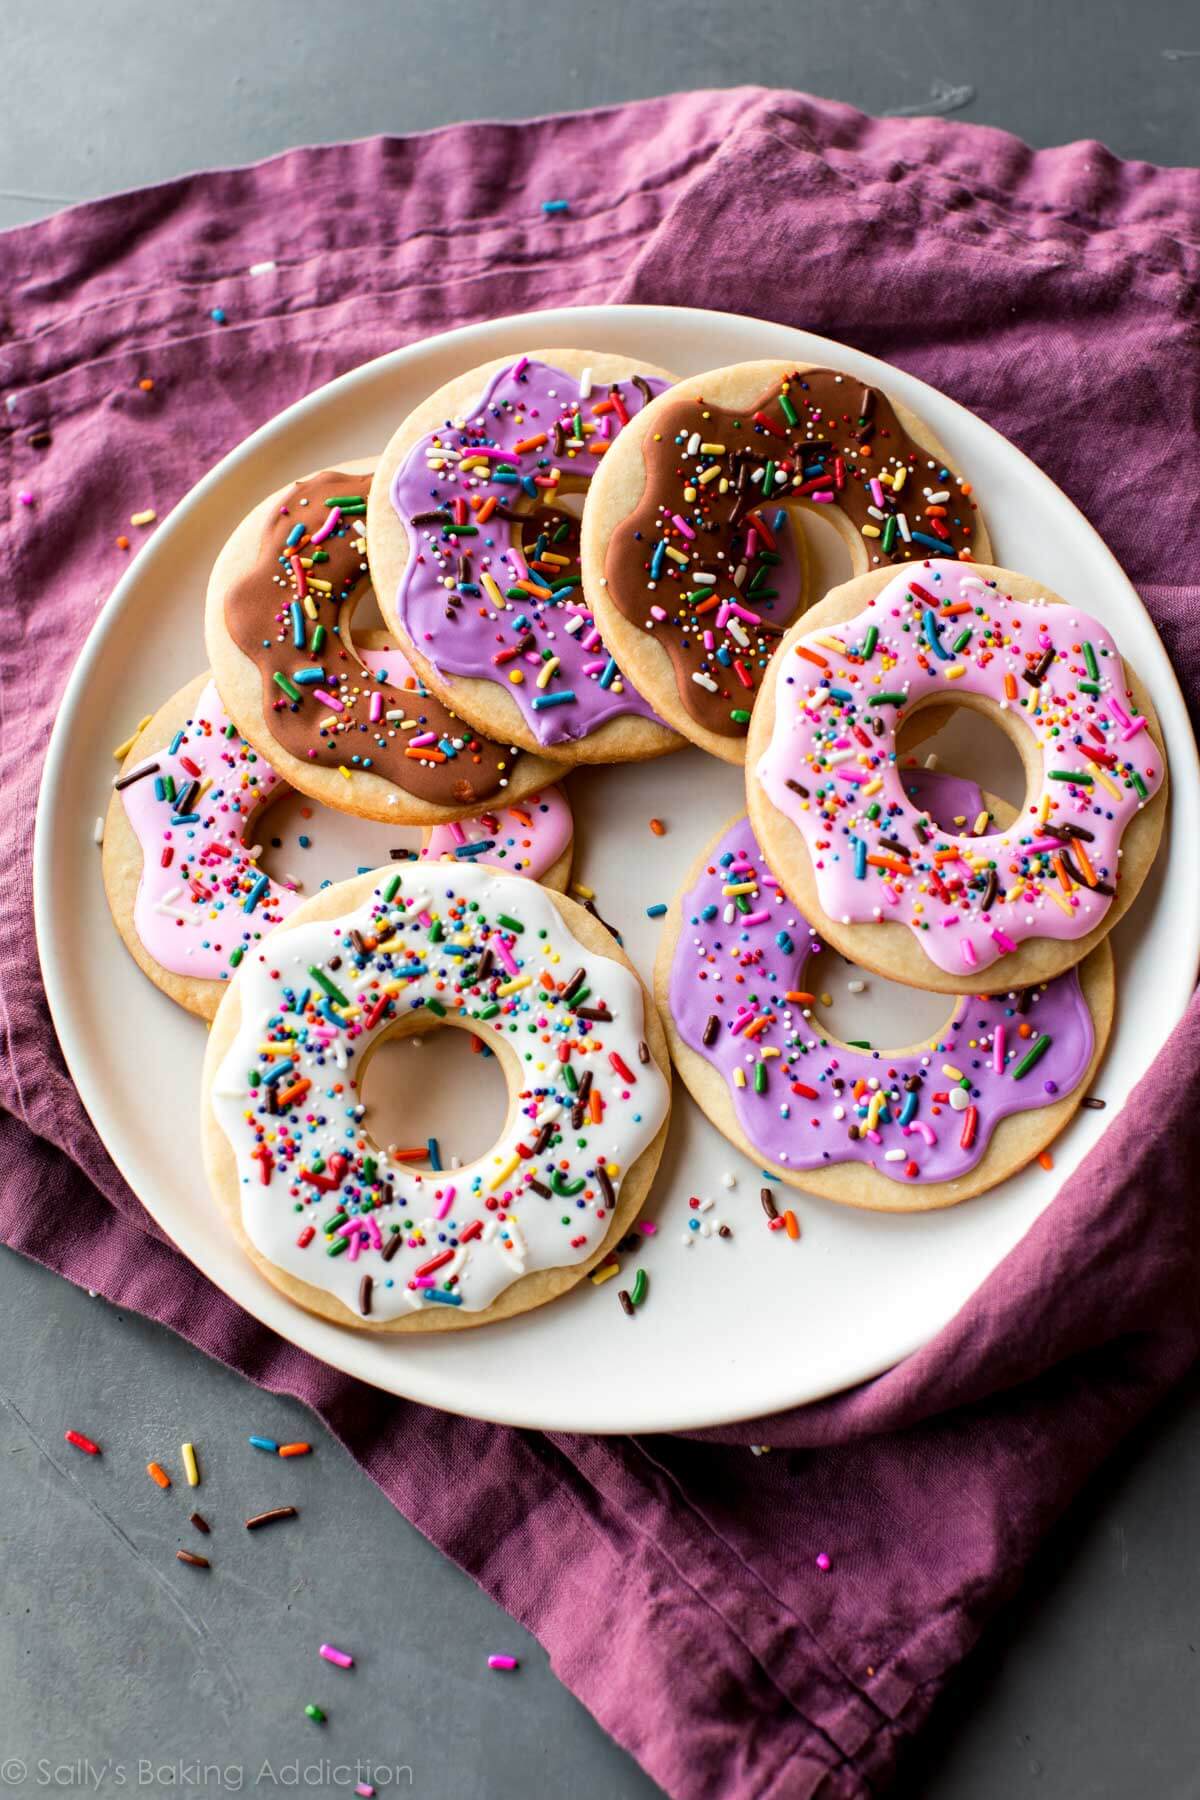 sugar cookies shaped and decorated like donuts